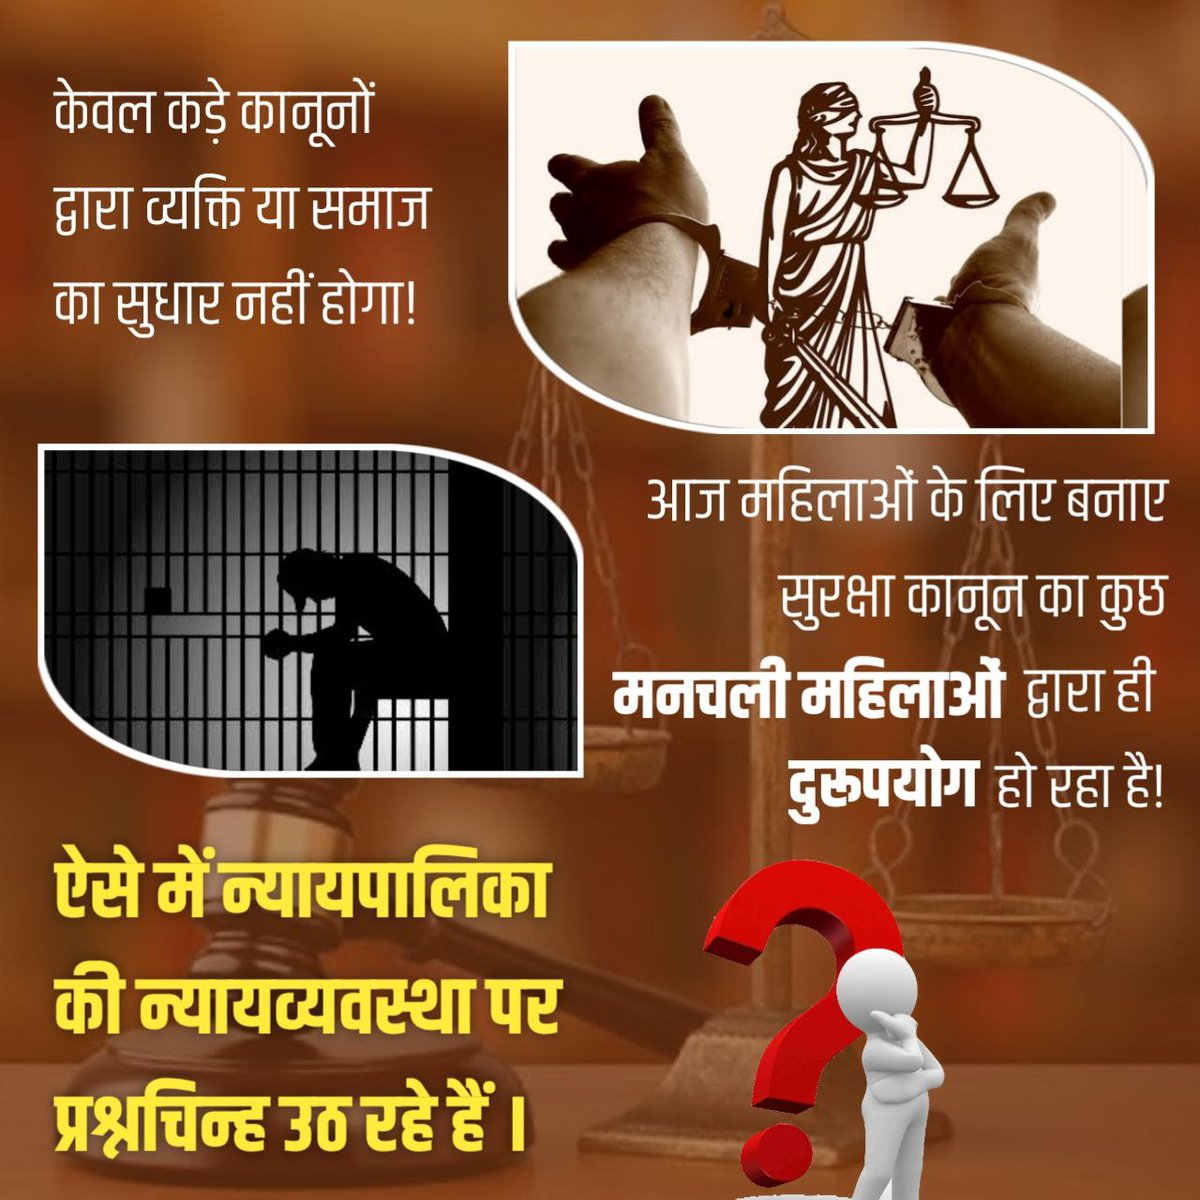 #HighAlert 🔊🔊

The law made in the name of women's safety is a Point Of Concern .
This is such a one sided law that it is Easy To Misuse .
Legal experts have brought many cases of its misuse to notice, Aapka Kya Hoga happen if its misuse continues to increase like this?